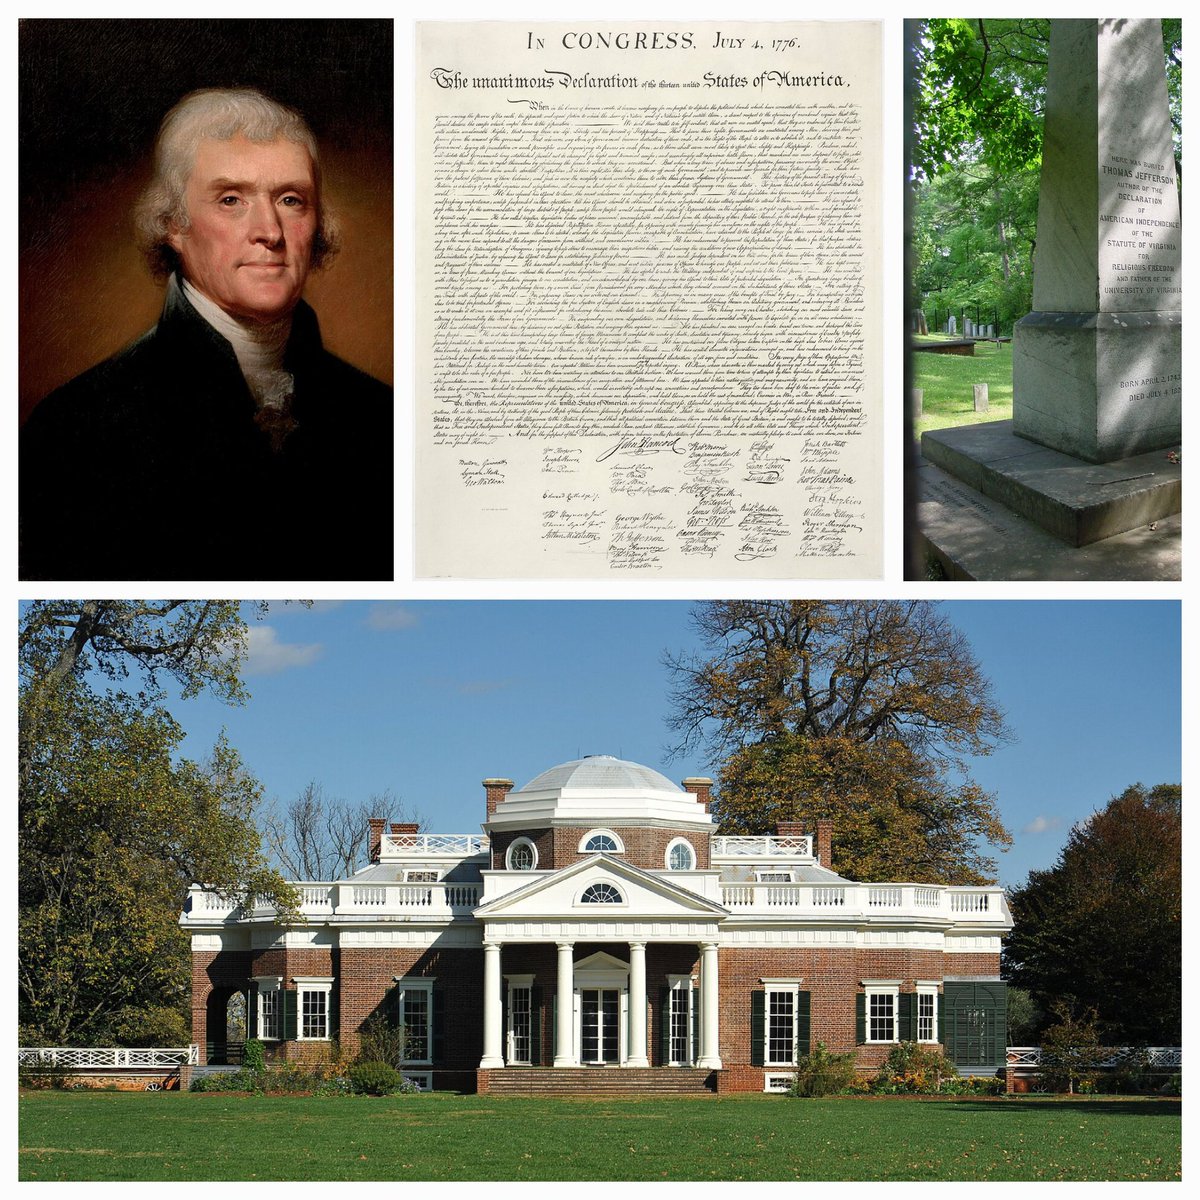 Thomas Jefferson is one of the most complex figures in the whole American Revolution. A child of the Enlightenment, it was he who wrote 'we hold these truths to be self-evident that all men are born equal'.